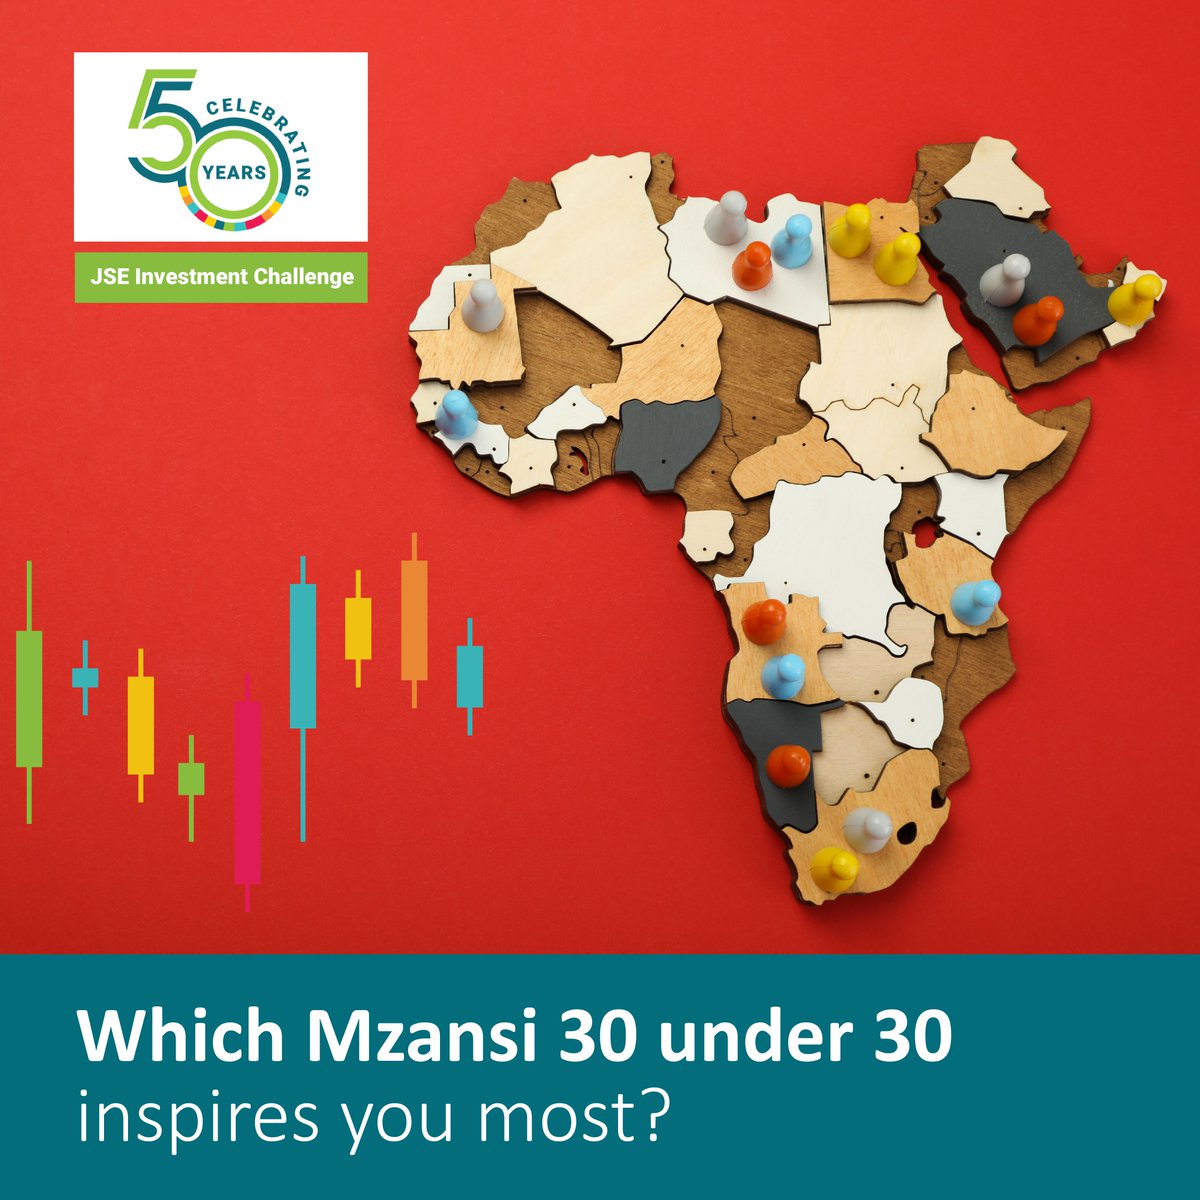 Forbes Africa's 30 Under 30 class of 2023 features 11 of Mzanzi's own!

Check out the list and tell us who inspires you most: bit.ly/43AmMCX

Register for the #JSEInvestmentChallenge2023 and join the wave of success: bit.ly/3Mt9d2n

#ForbesAfrica30Under30 #JSE